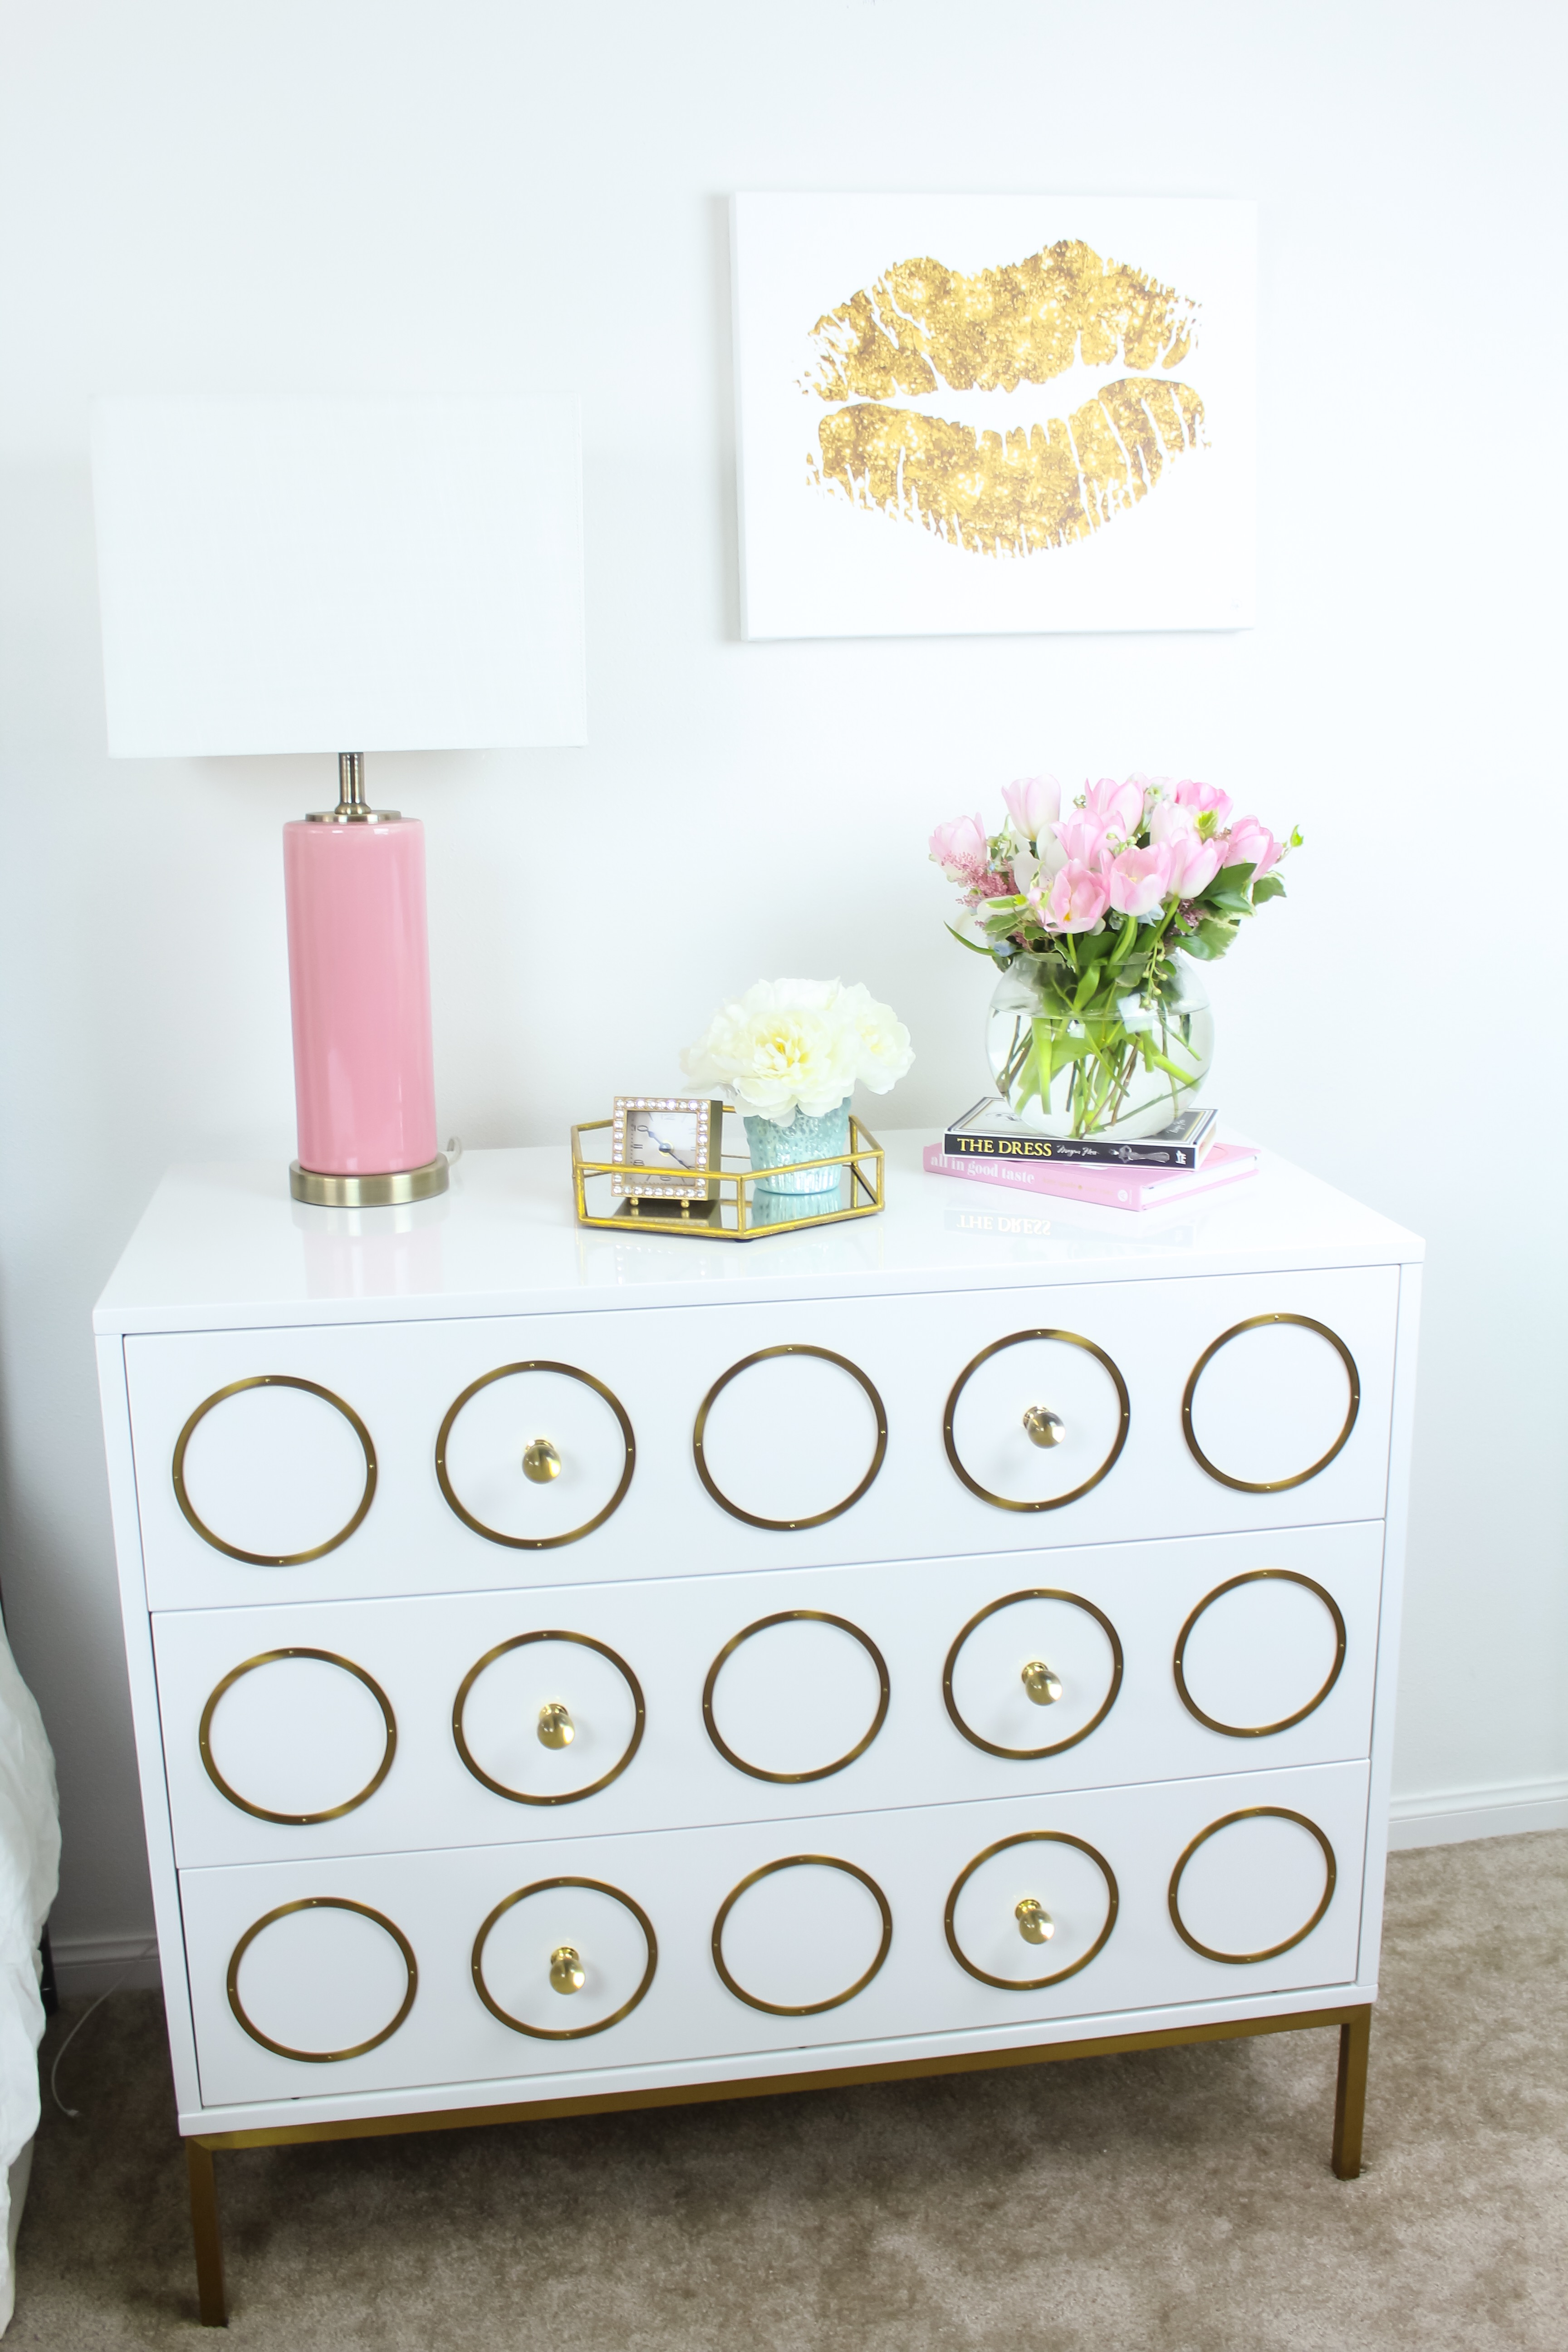 How I Created My Bedroom Oasis with Accents of Gold